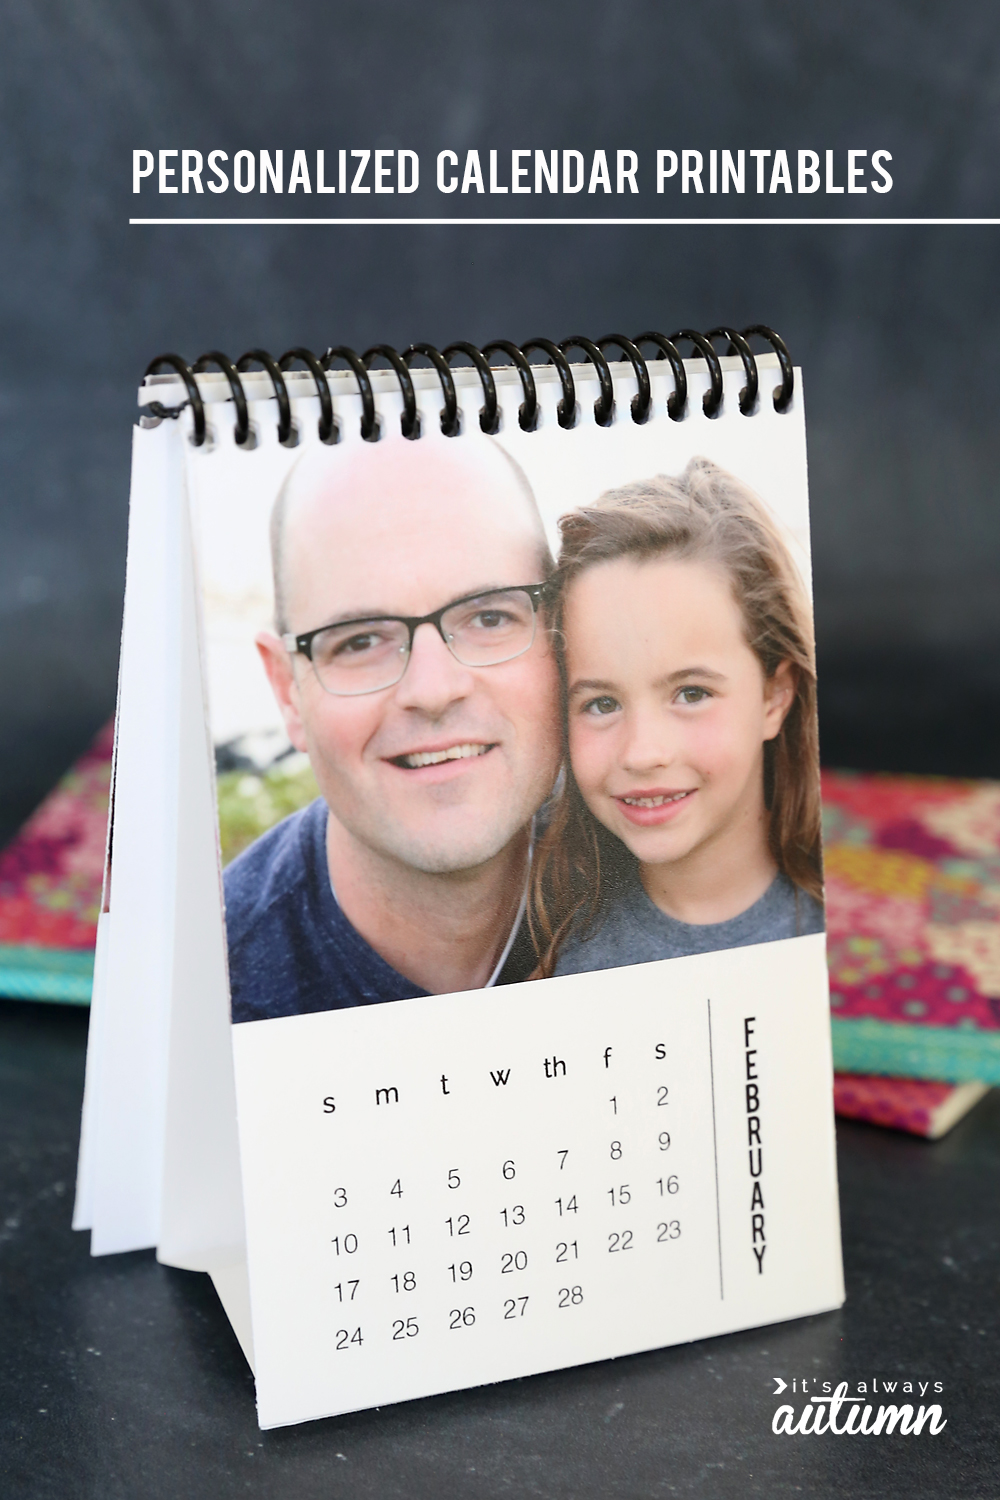 This personalized mini calendar makes a gift! It's easy and